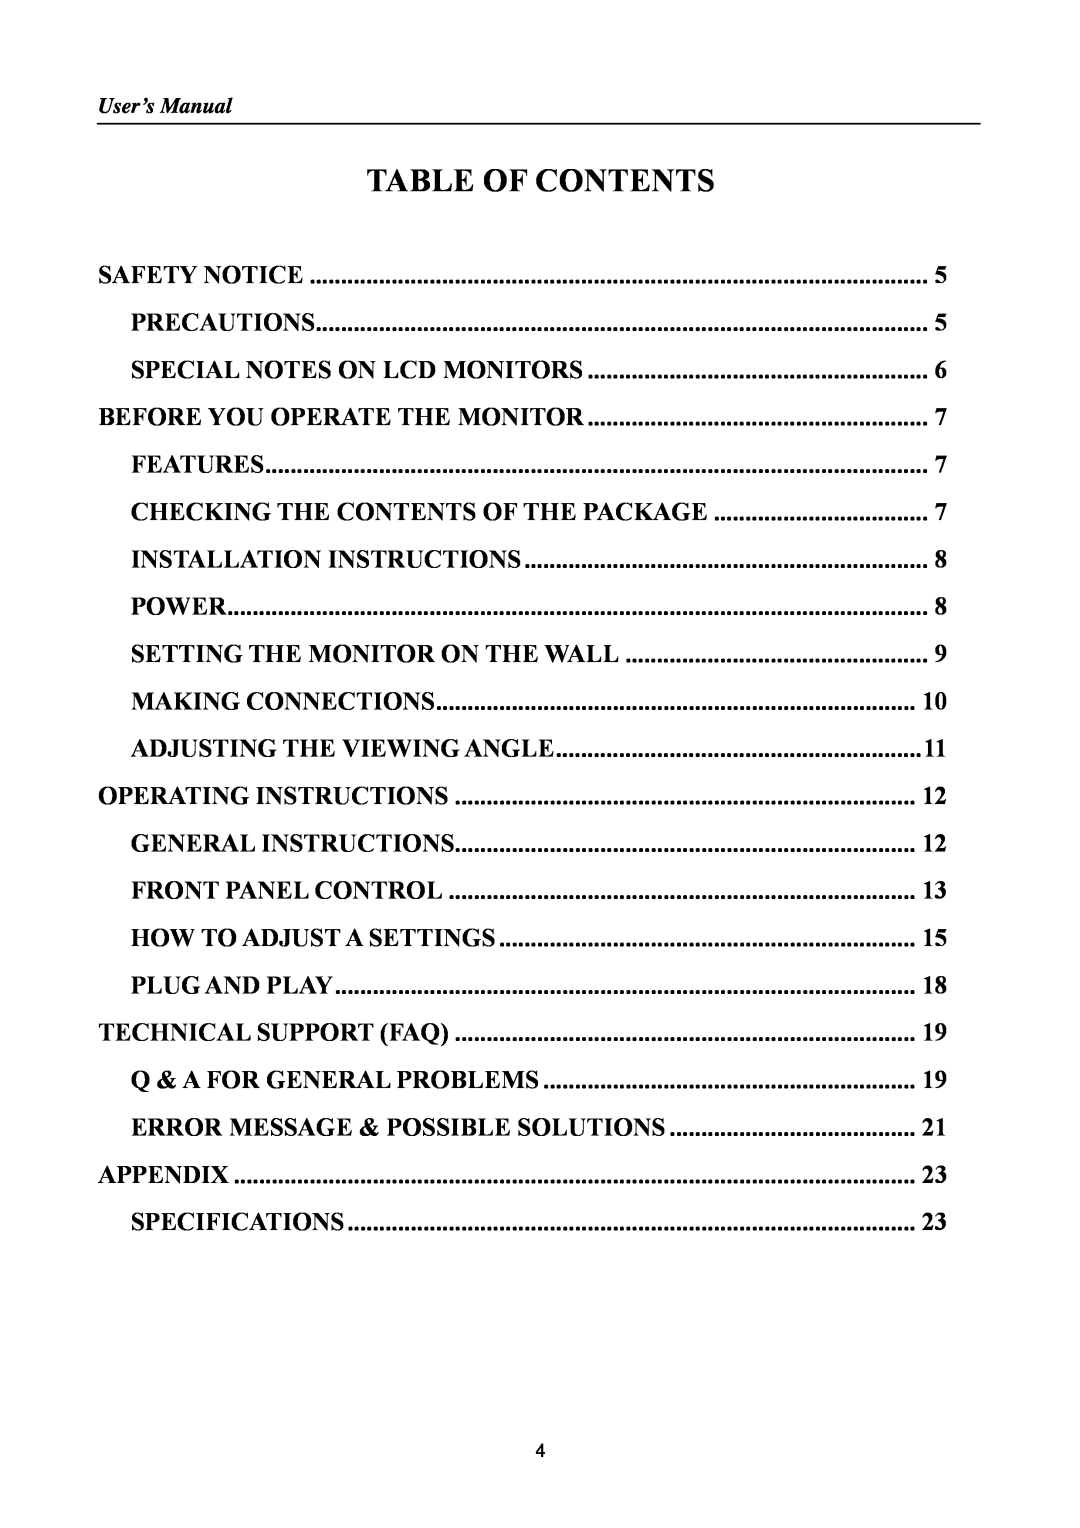 HANNspree SM198 manual Table Of Contents, Error Message & Possible Solutions 